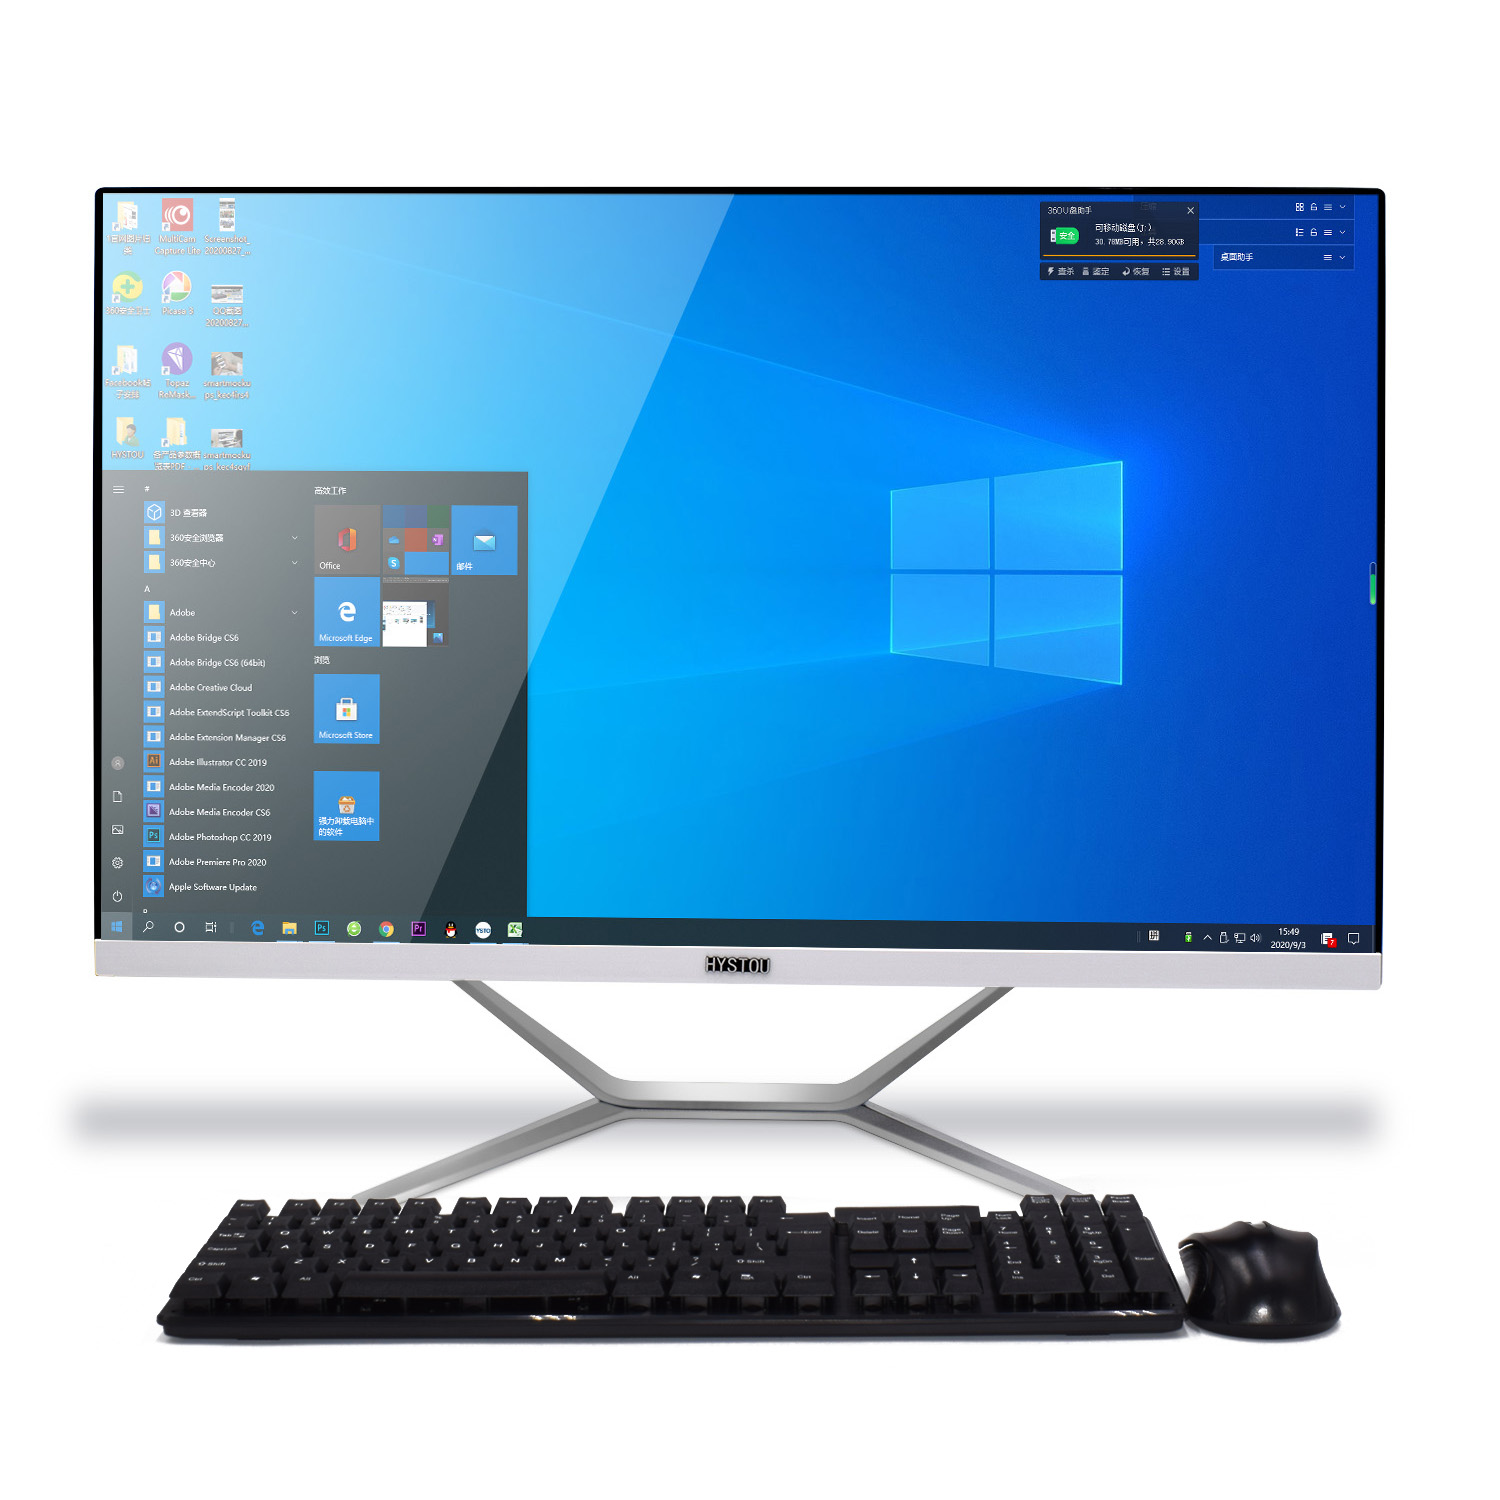 All In One Computer Core i3 i5 i7 Win 10 Gaming PC Desktops